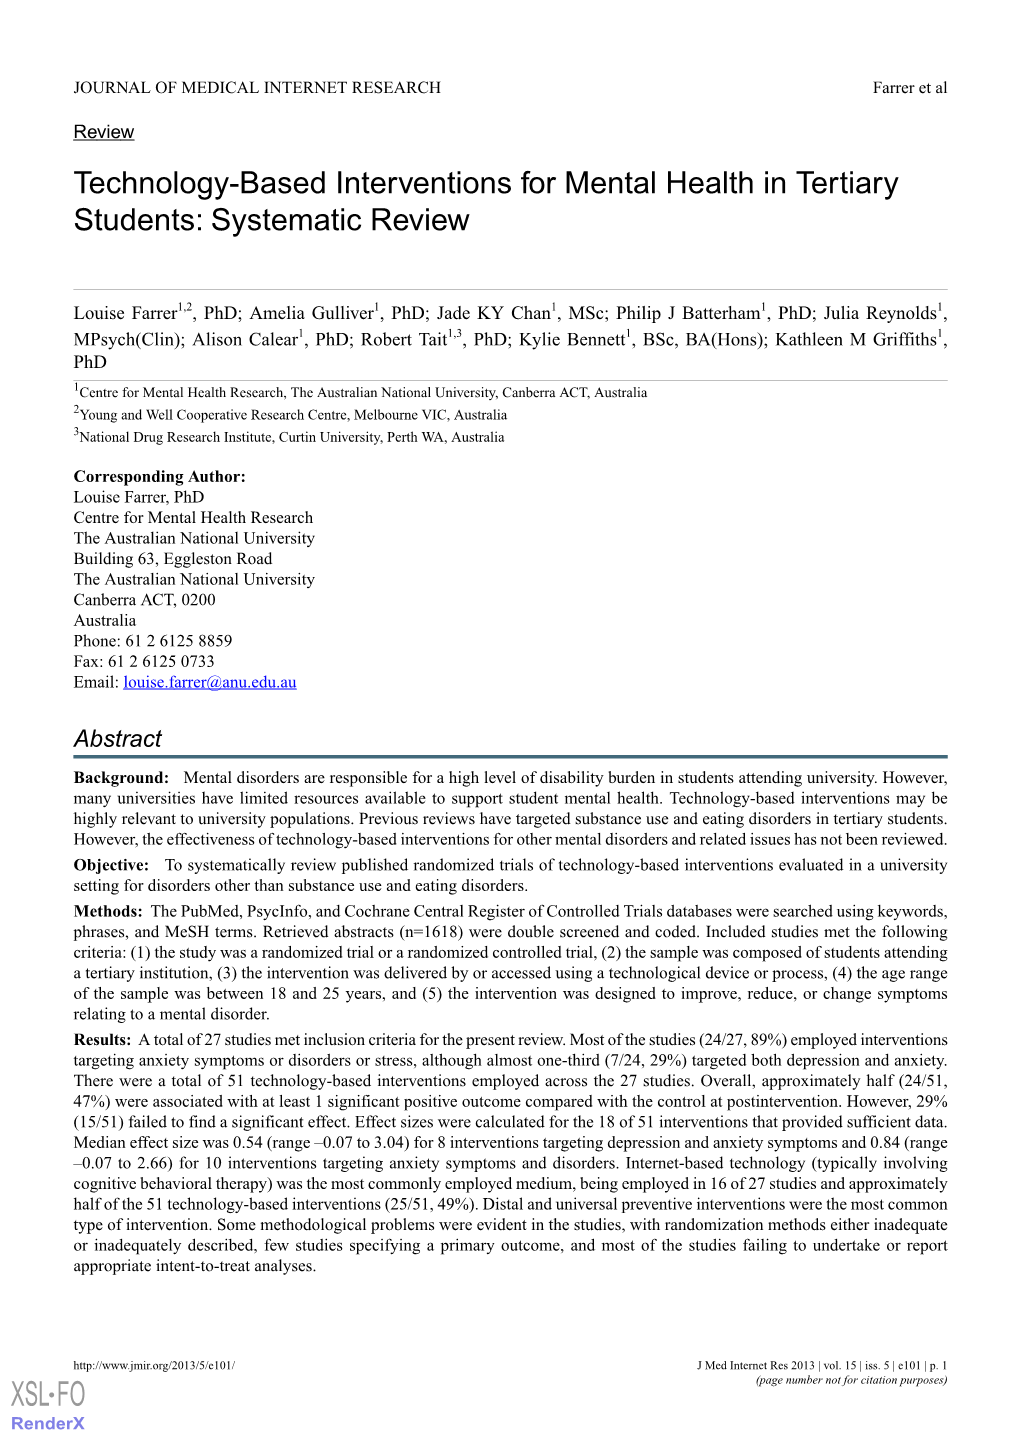 Technology-Based Interventions for Mental Health in Tertiary Students: Systematic Review